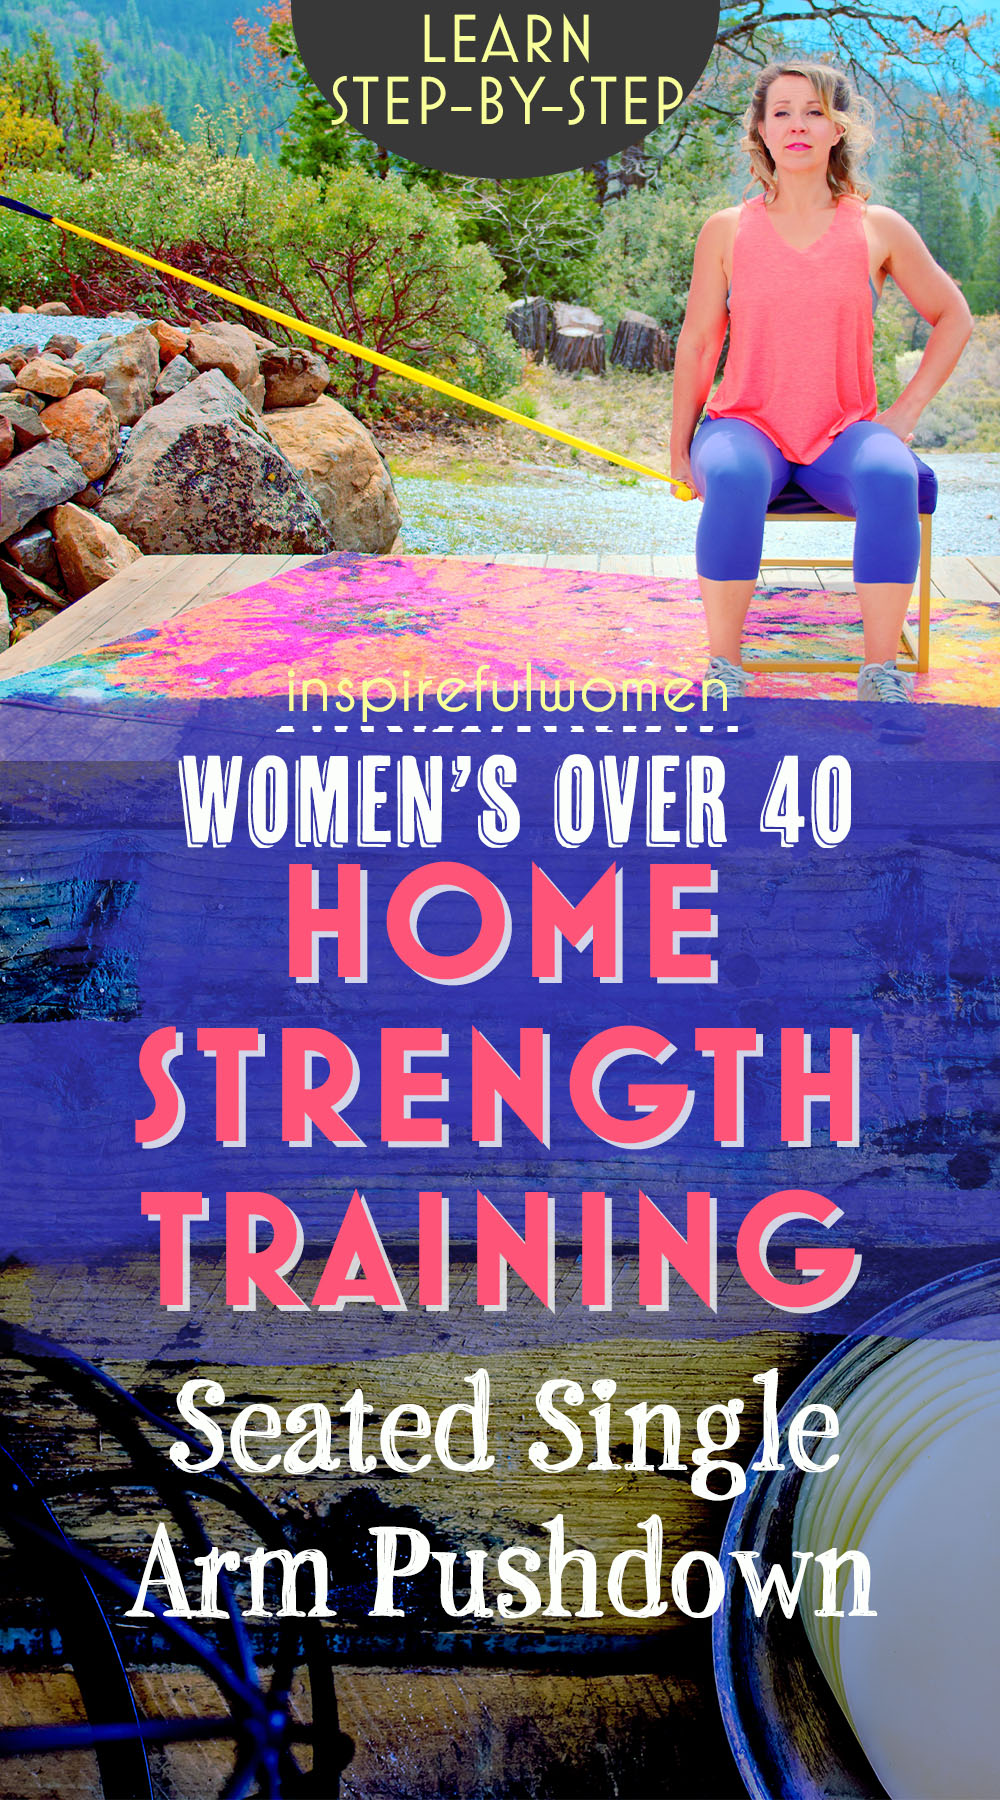 seated-single-arm-push-down-back-workout-home-strength-training-women-40-plus